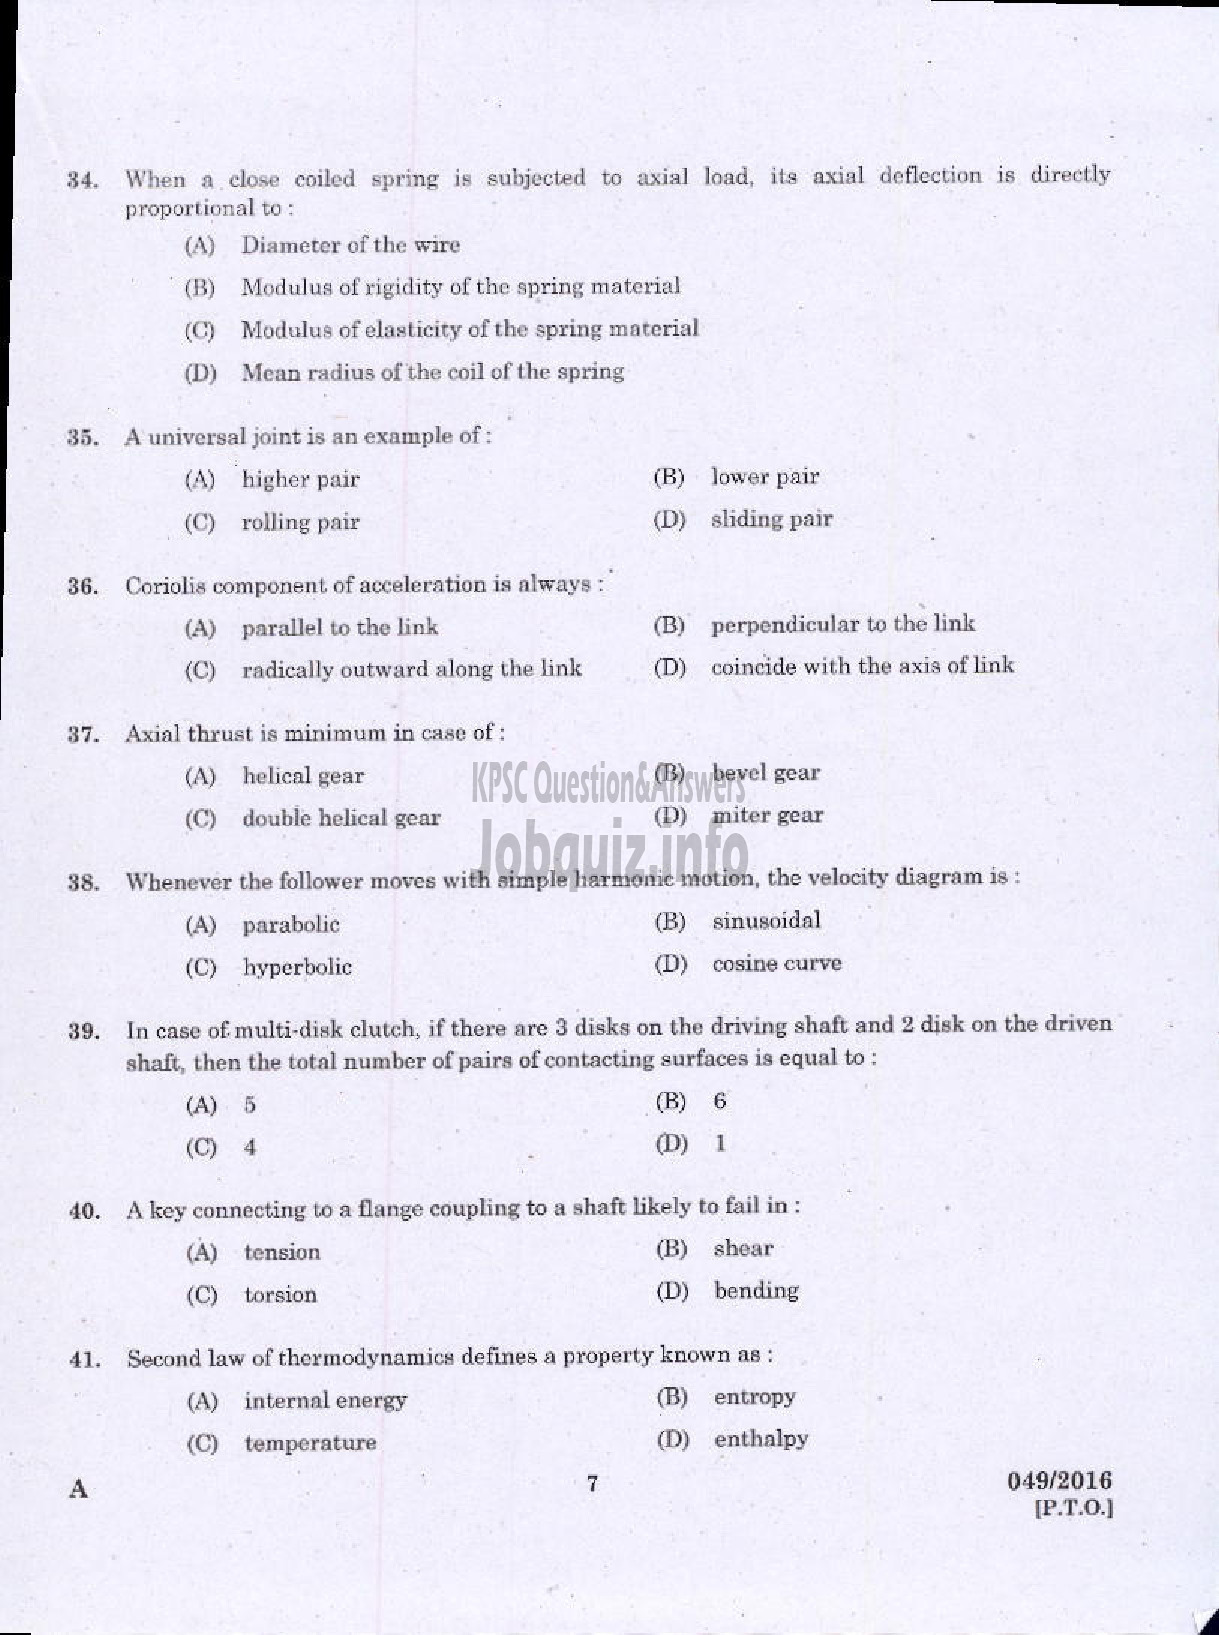 Kerala PSC Question Paper - WORKS MANAGER STATE WATER TRANSPORT-5